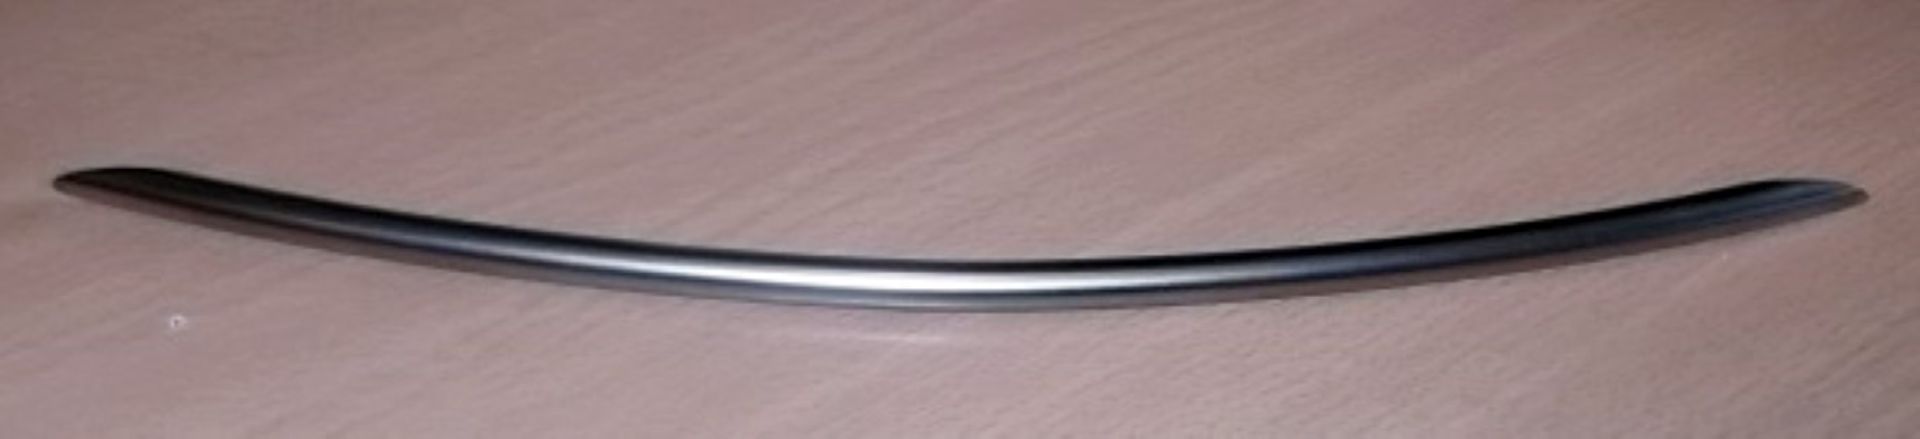 100 x BOW Handle Kitchen Door Handles By Crestwood - 320mm - New Stock - Brushed Nickel Finish - - Image 7 of 8